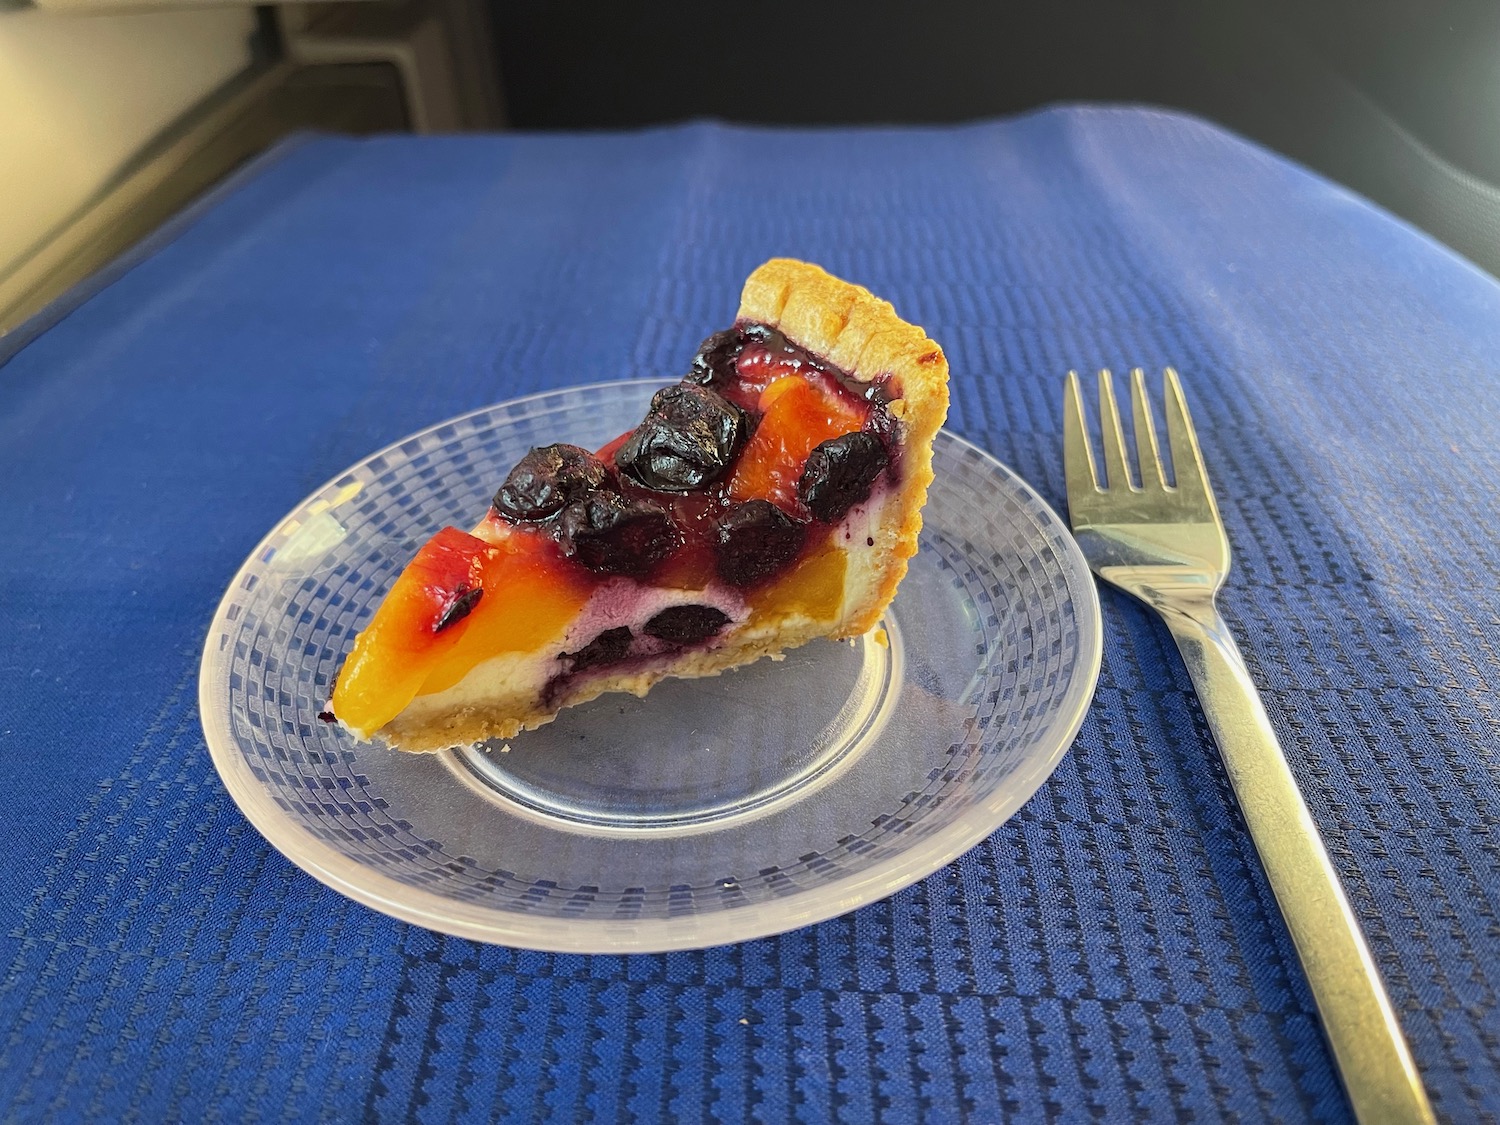 a slice of fruit pie on a plate with a fork